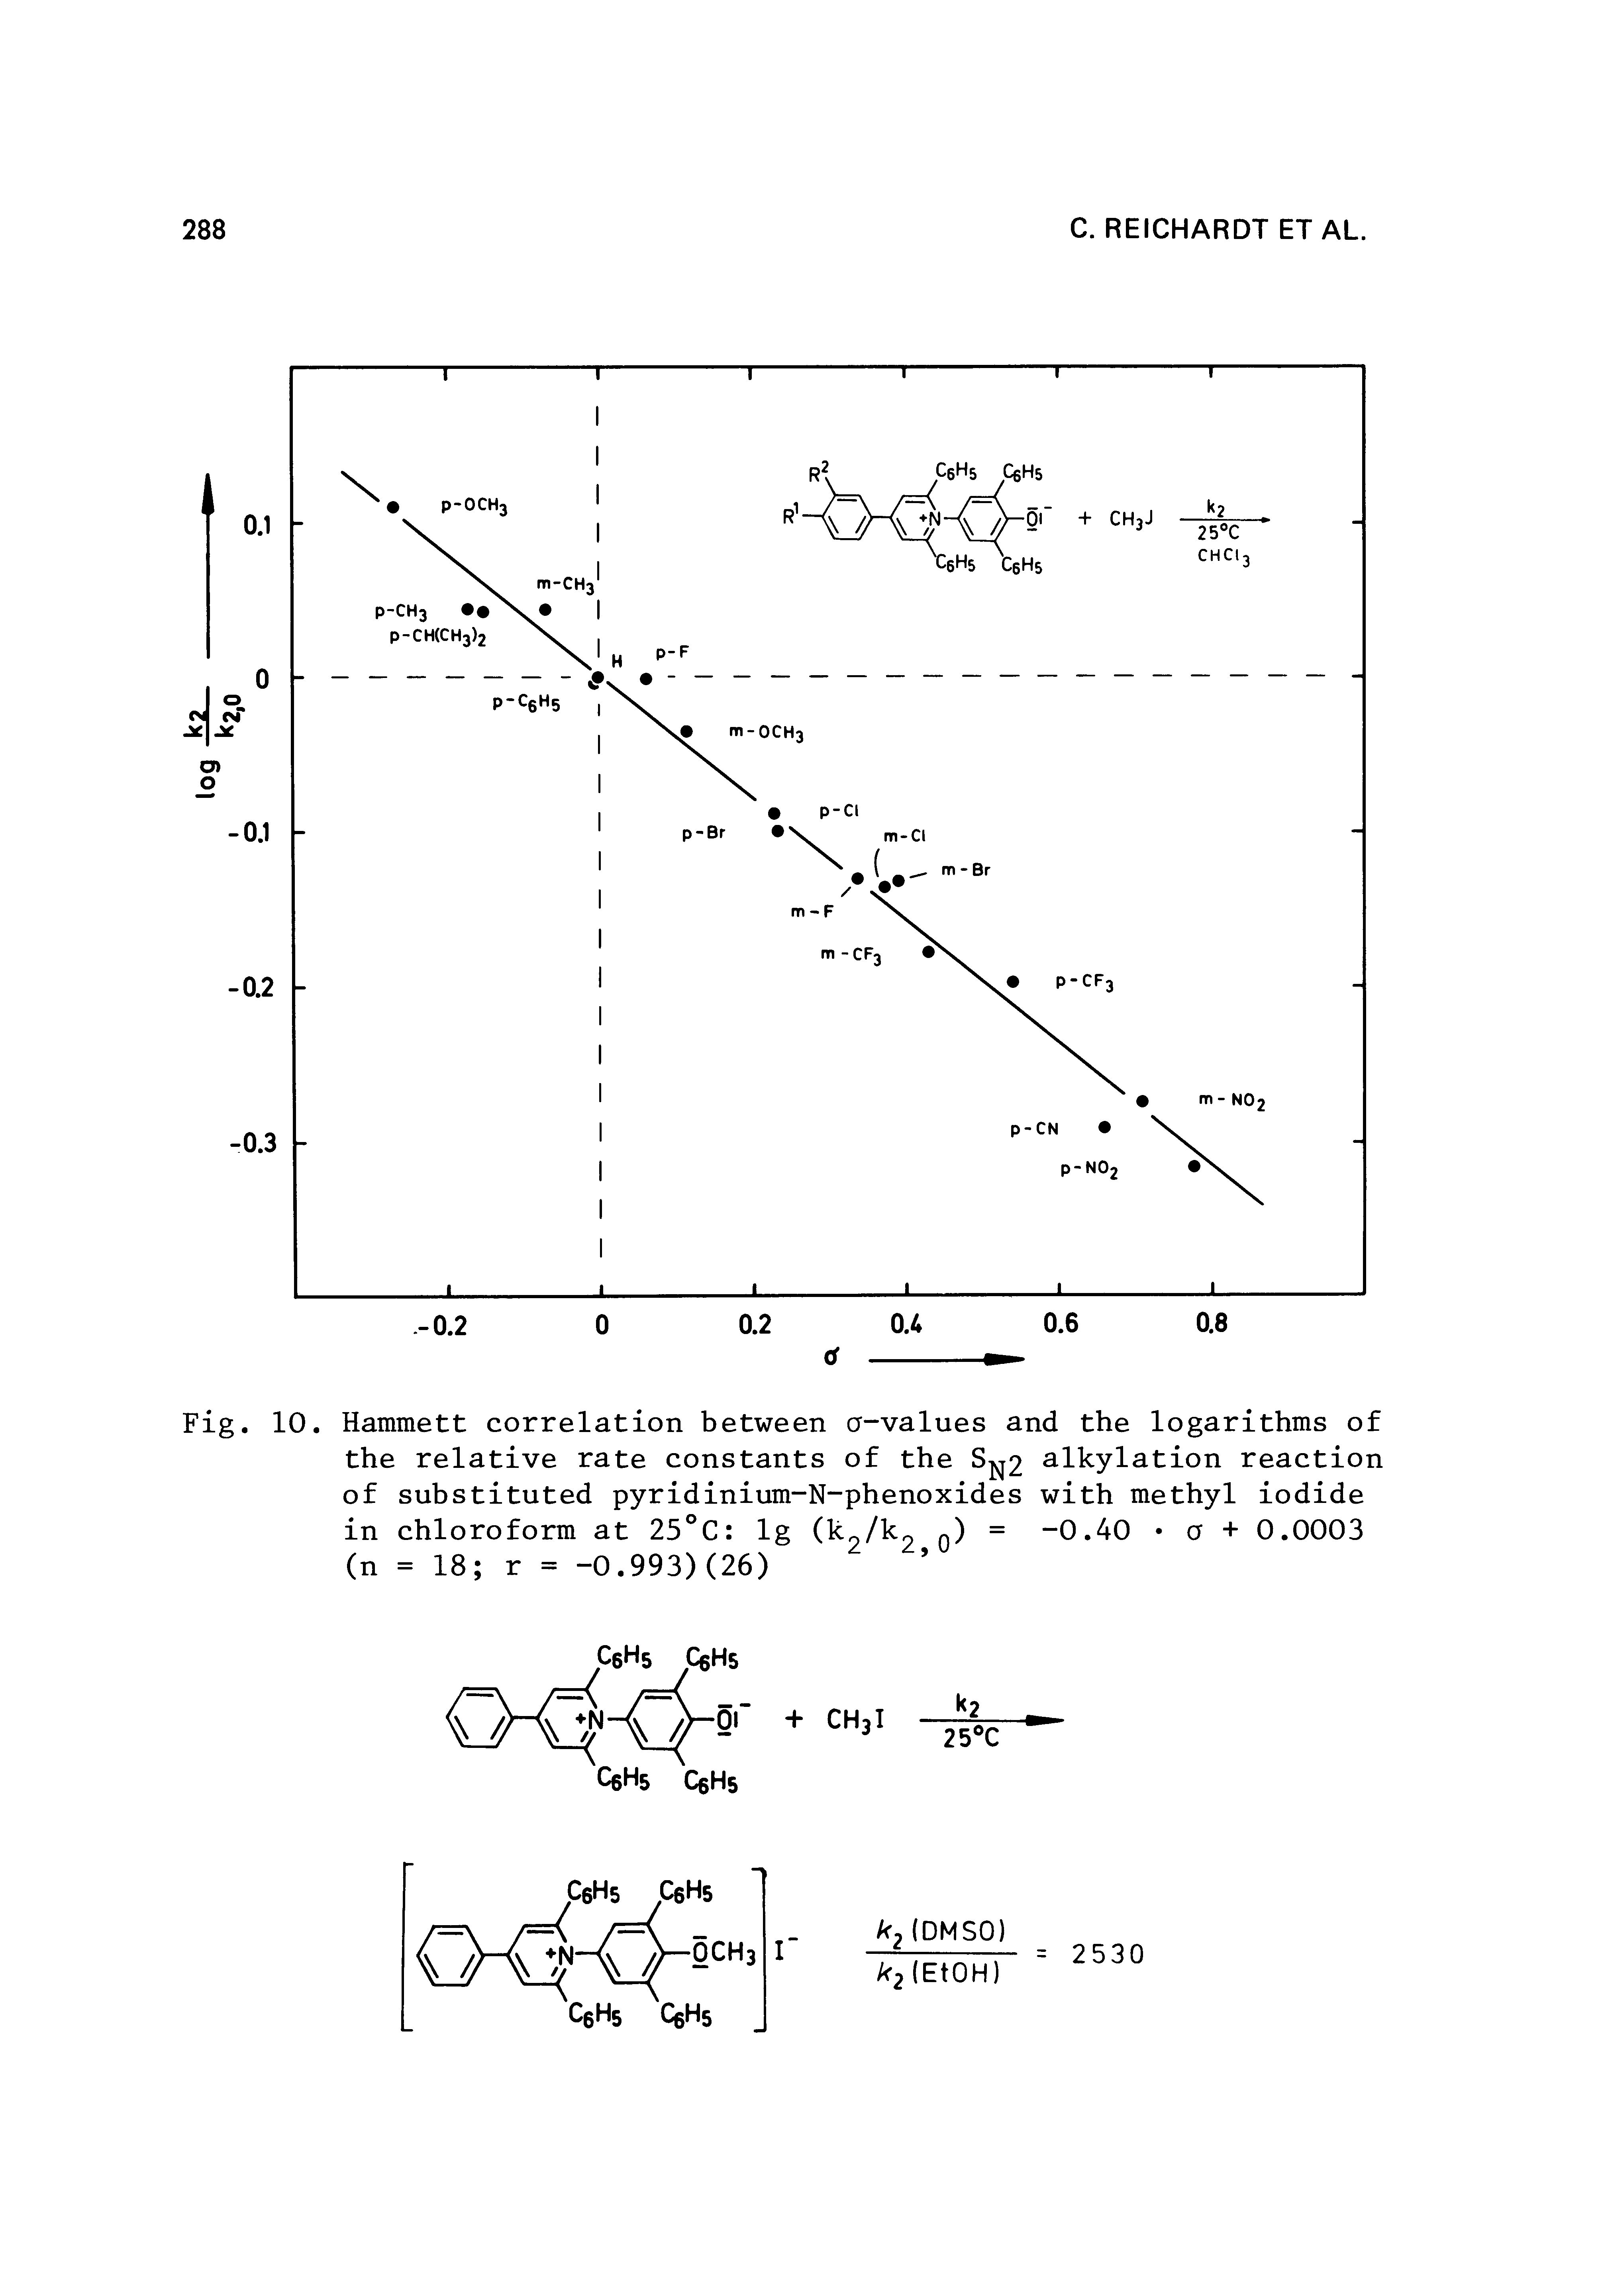 Fig. 10. Hammett correlation between a-values and the logarithms of the relative rate constants of the S 2 alkylation reaction of substituted pyridinium-N-phenoxides with methyl iodide in chloroform at 25°C Ig (k /k q) = 0.40 a + 0.0003...